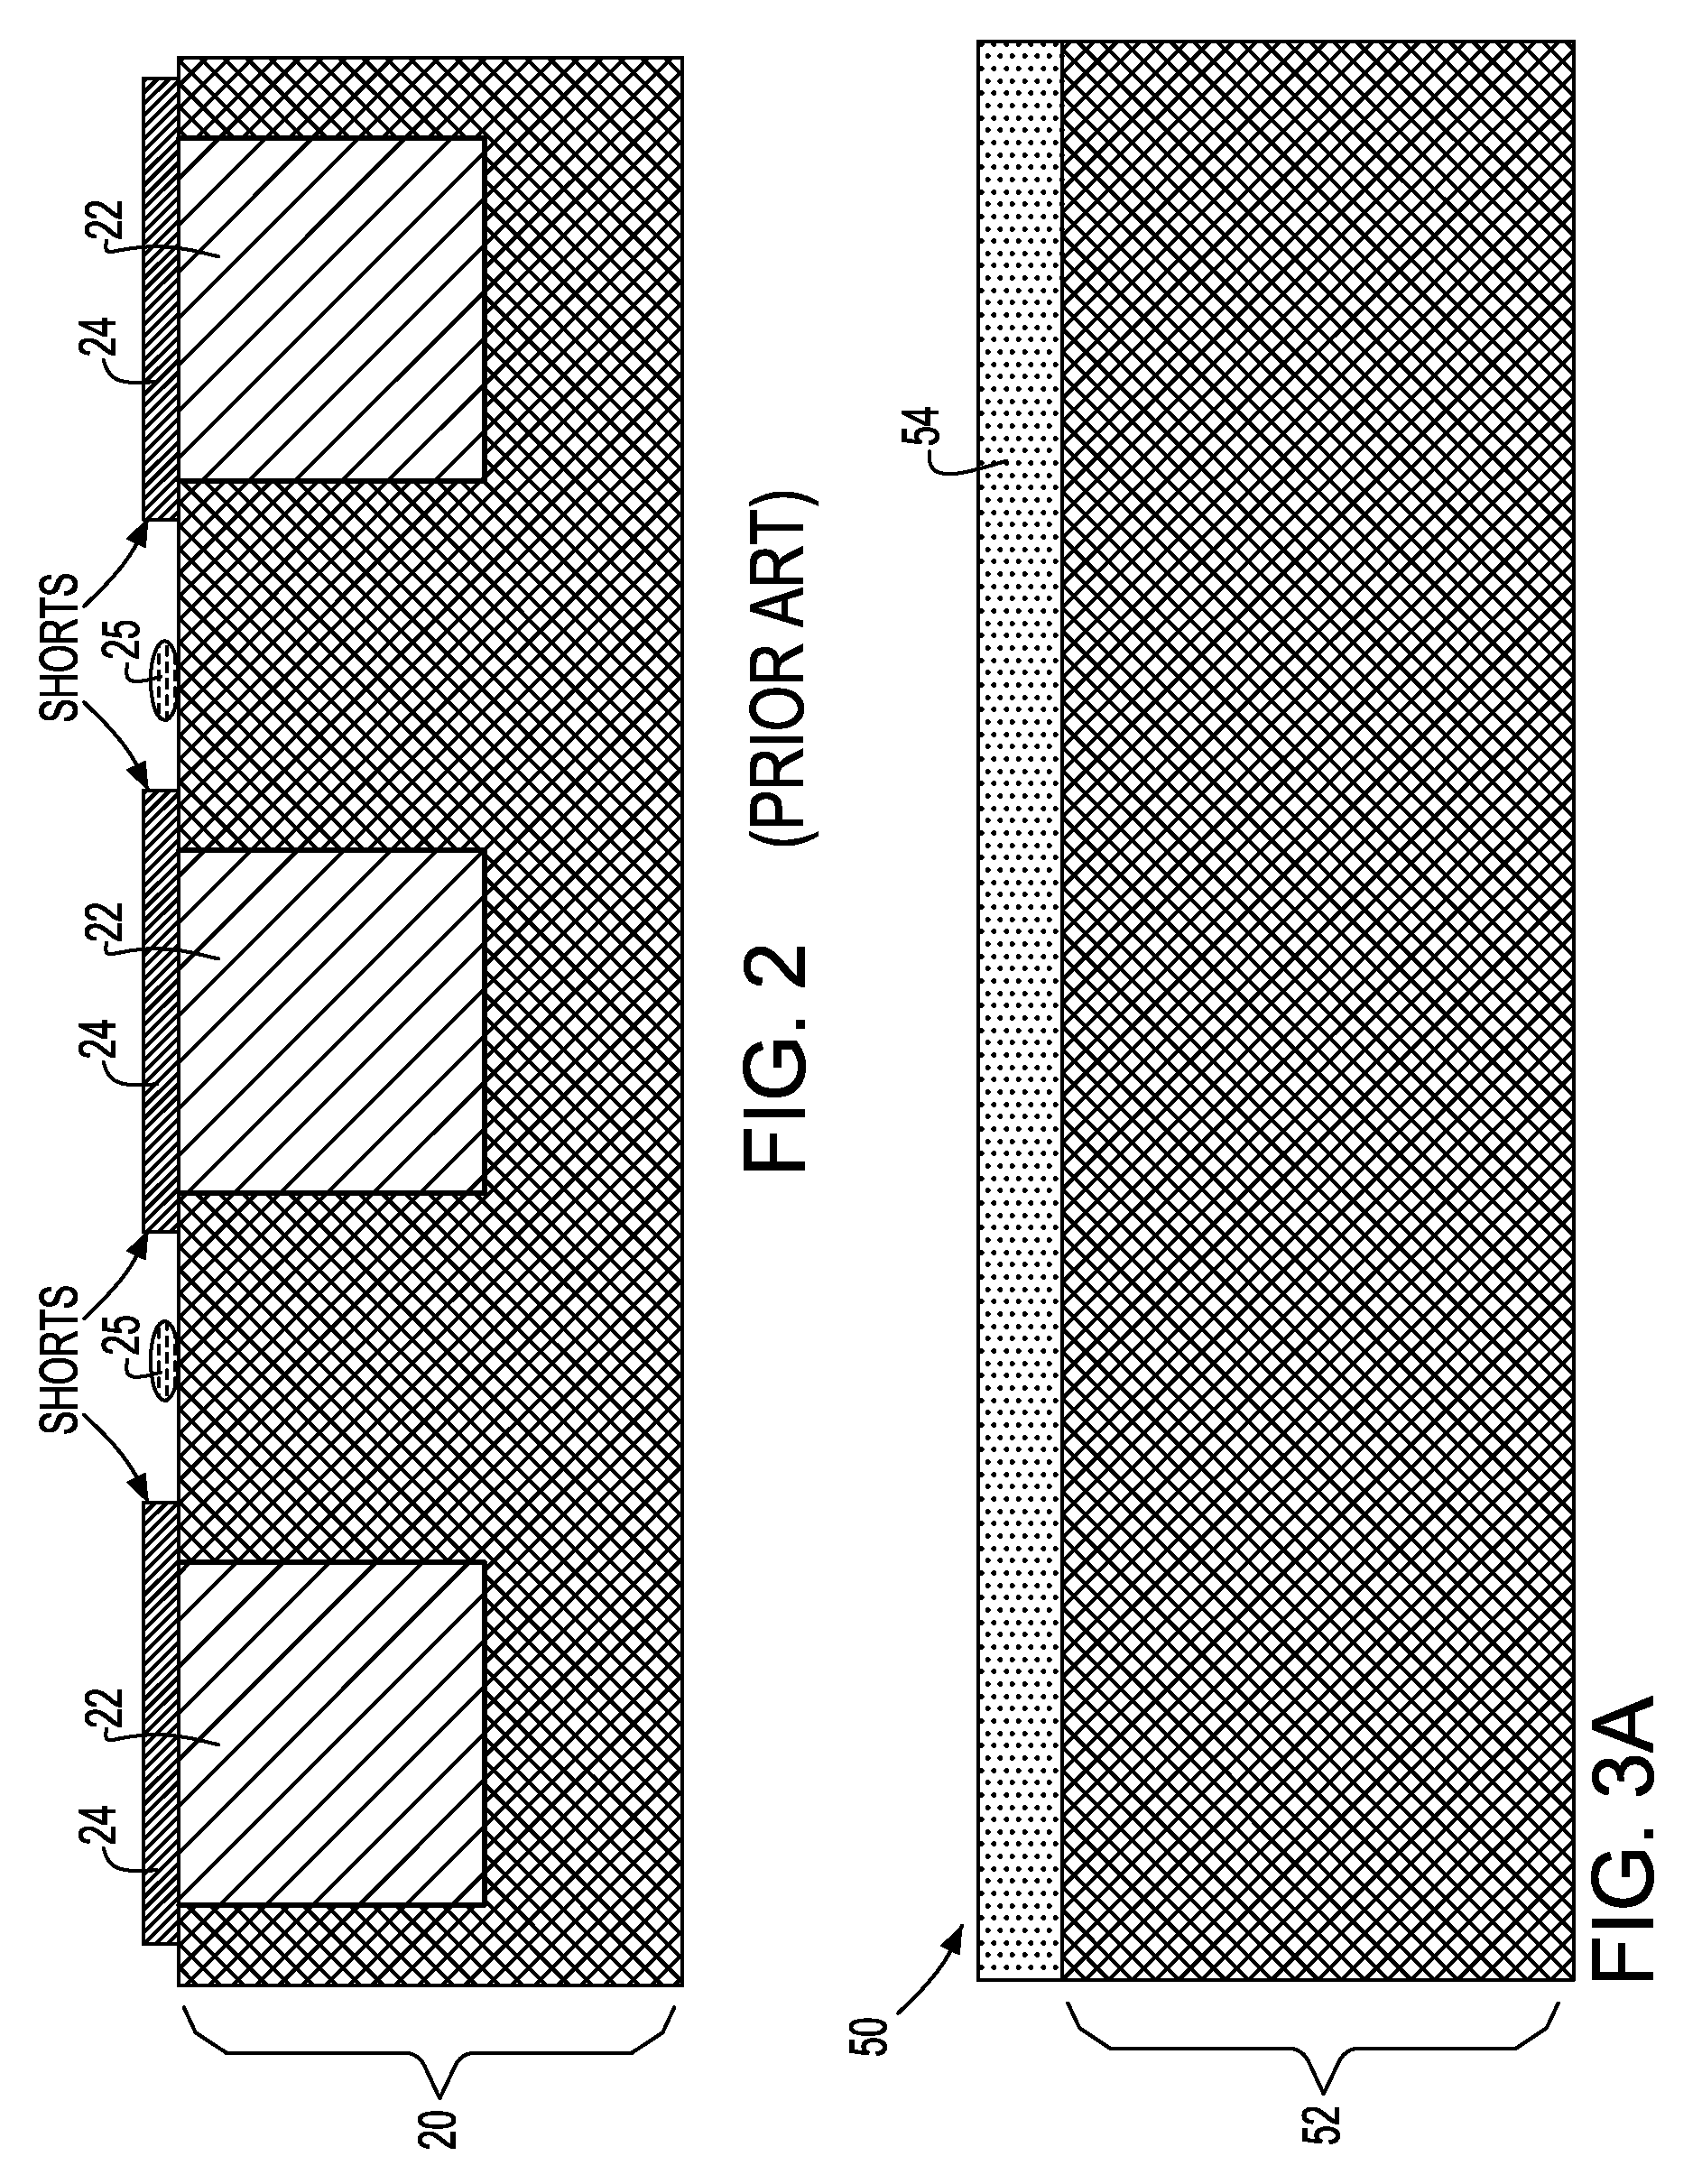 METAL CAP WITH ULTRA-LOW k DIELECTRIC MATERIAL FOR CIRCUIT INTERCONNECT APPLICATIONS